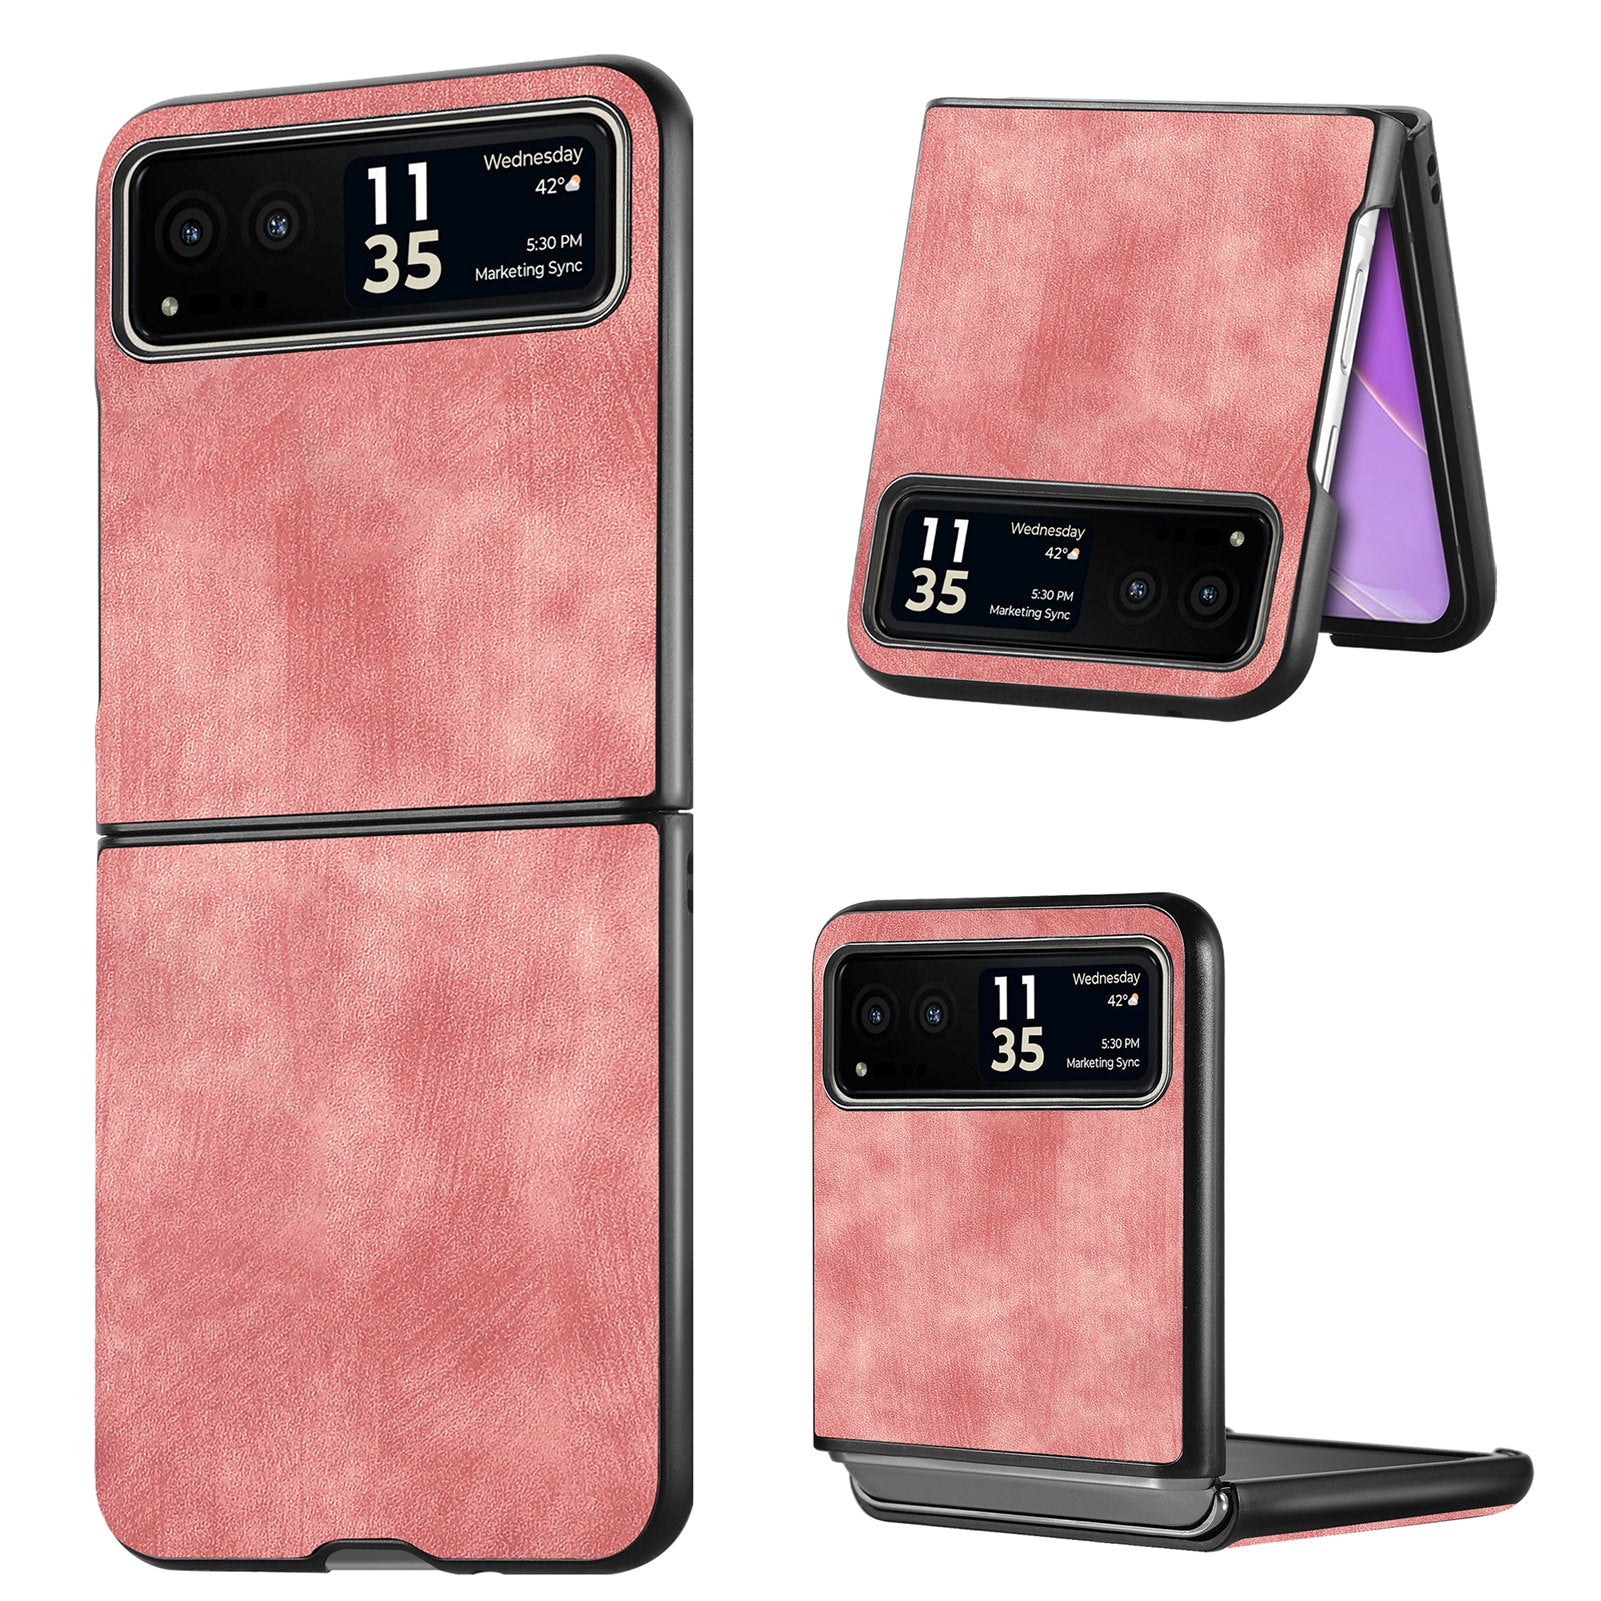 Uniqkart for Motorola Razr 40 5G Phone Case PU Leather Coated PC Case Skin-Touch Protective Cover - Rose Pink